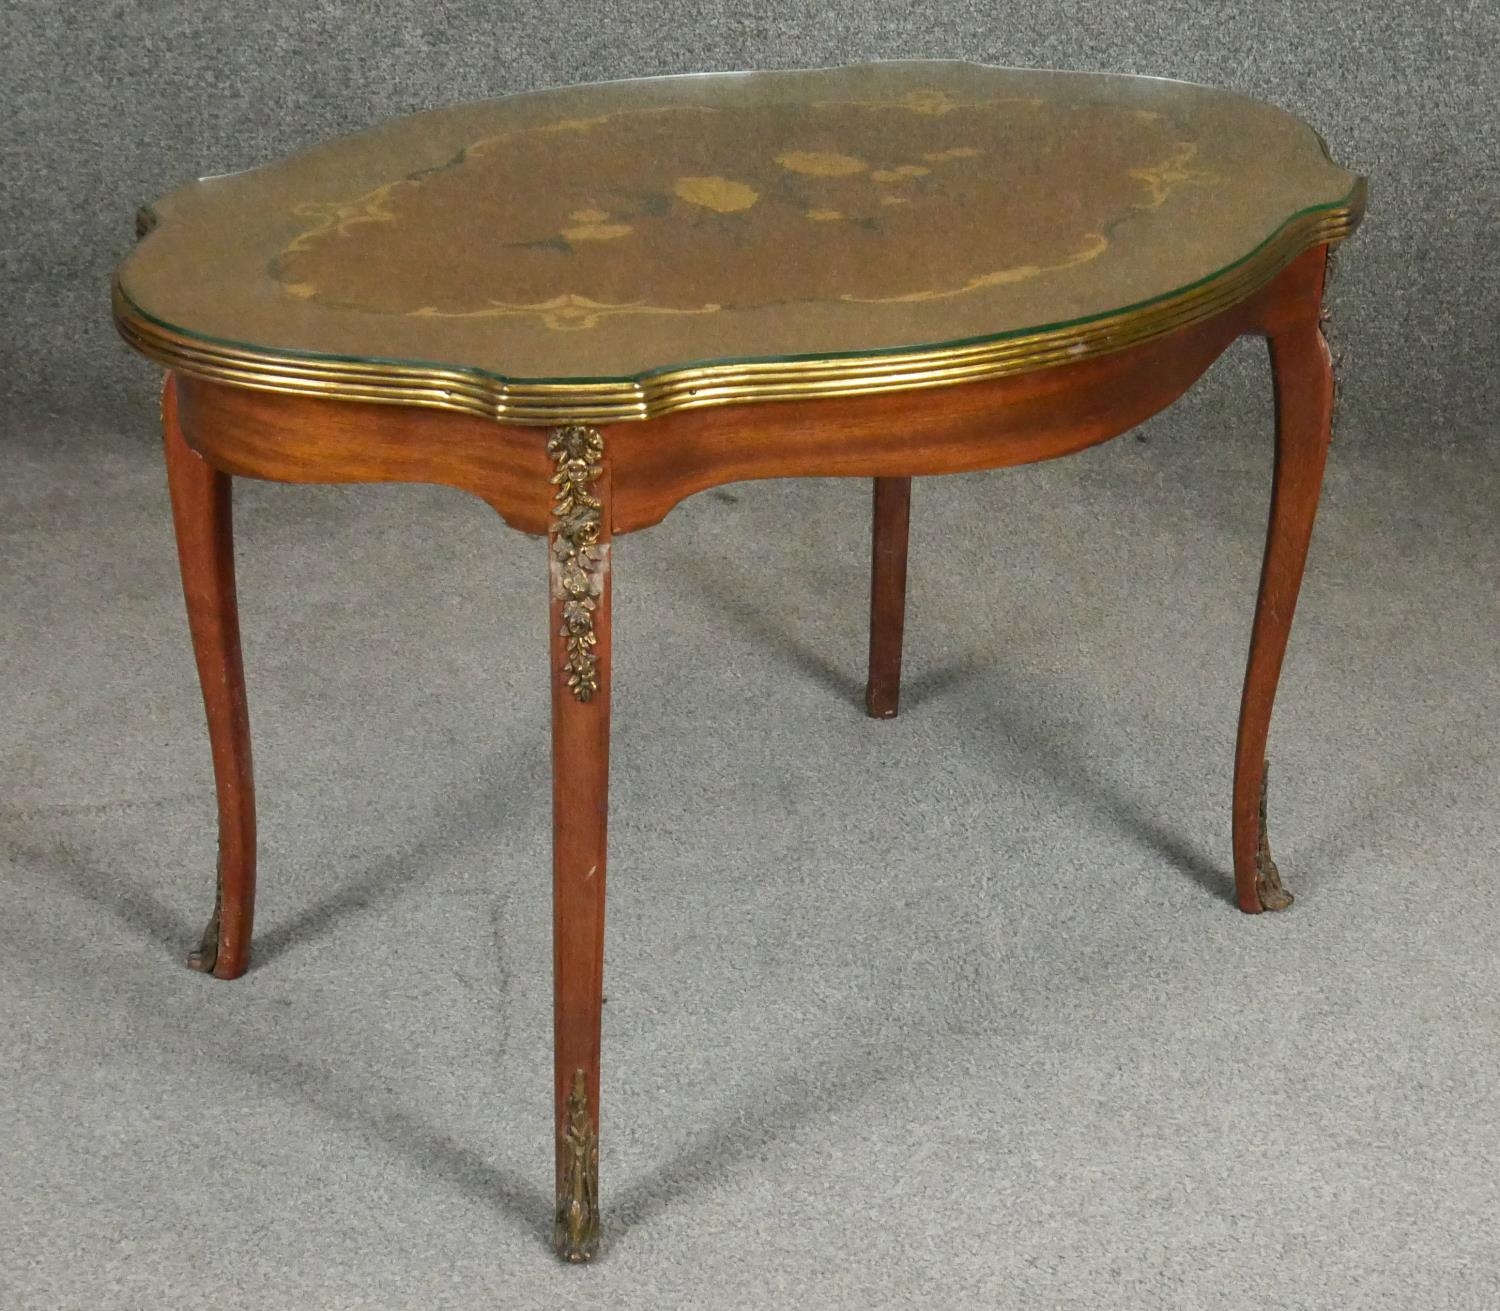 An Italian walnut and floral inlaid occasional table with shaped glass top on ormolu mounted - Image 2 of 5